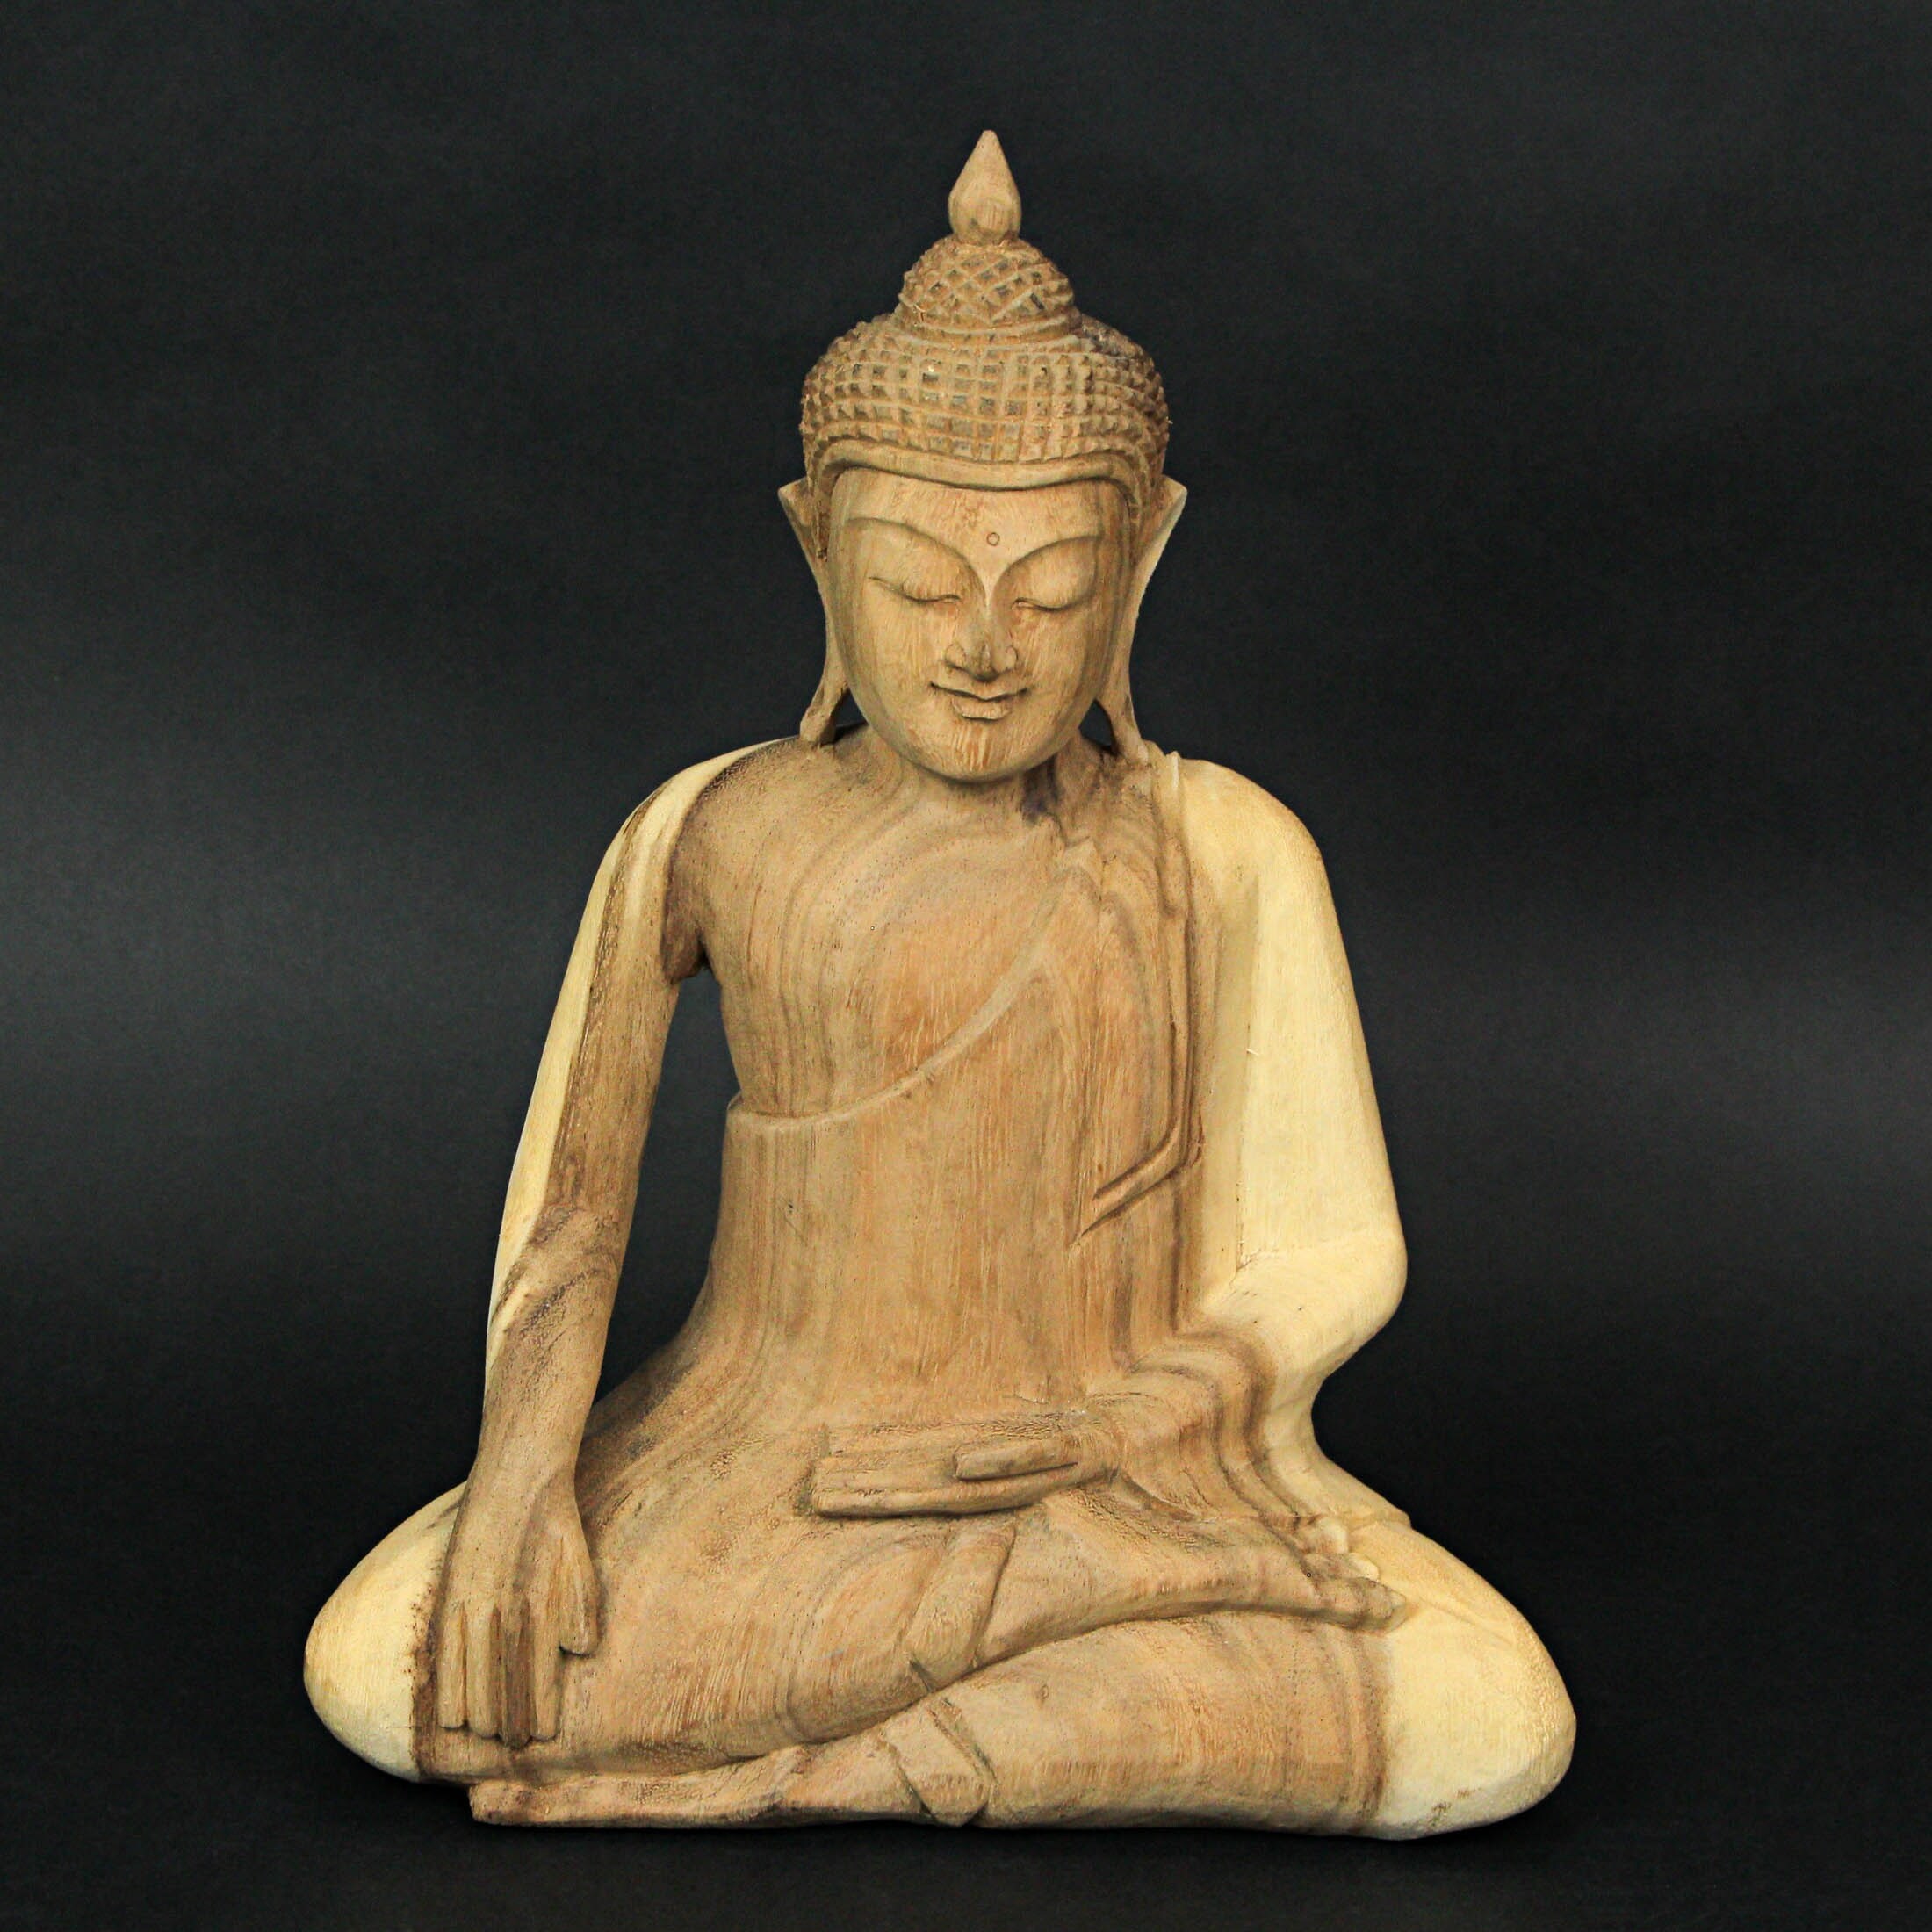 Hand Carved Wood Sculpture - Sitting Buddha